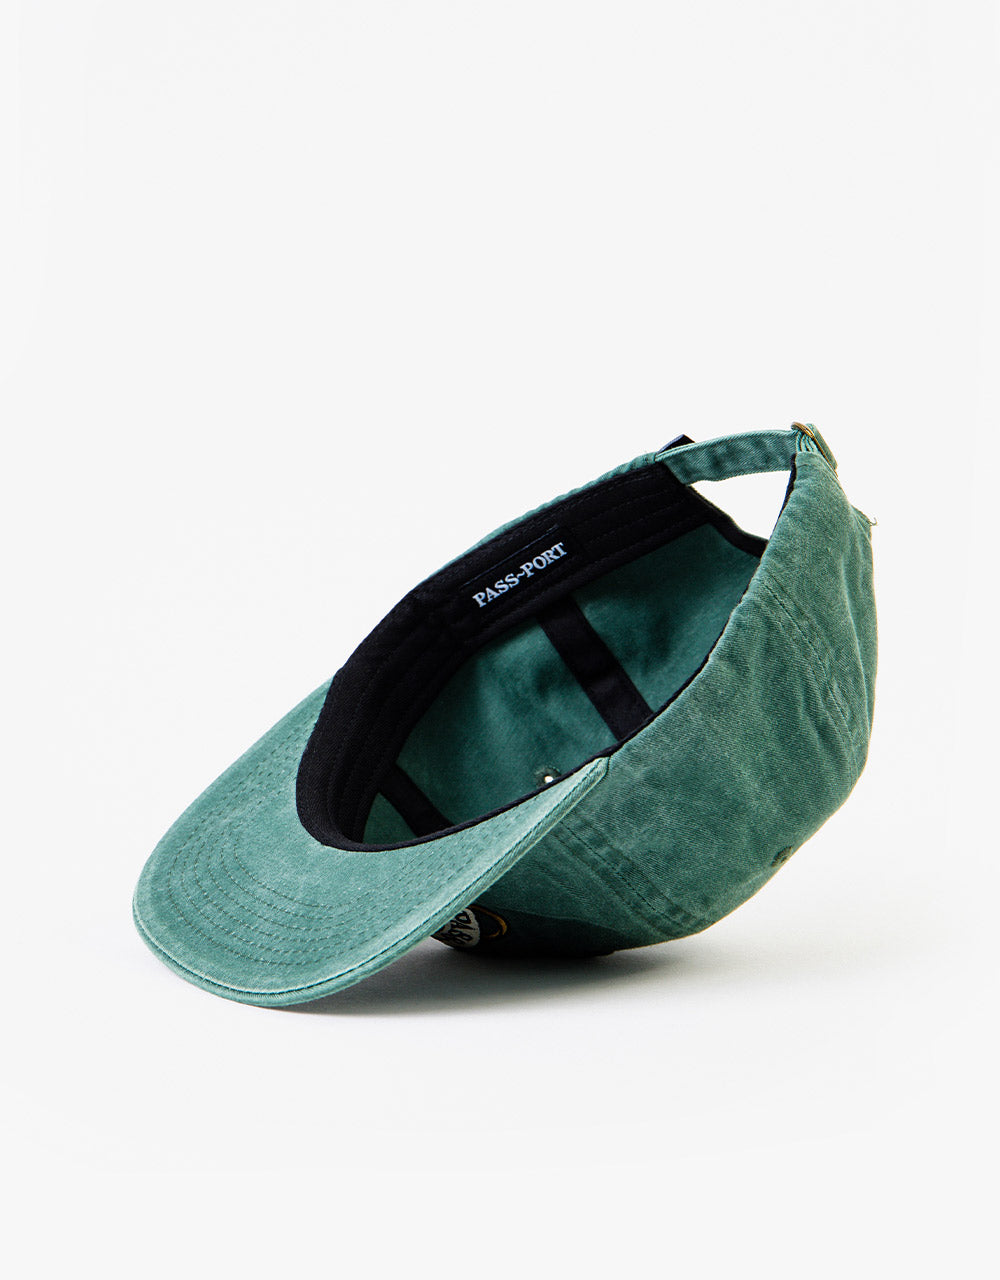 Pass Port Communal Rings 6 Panel Cap - Forest Green